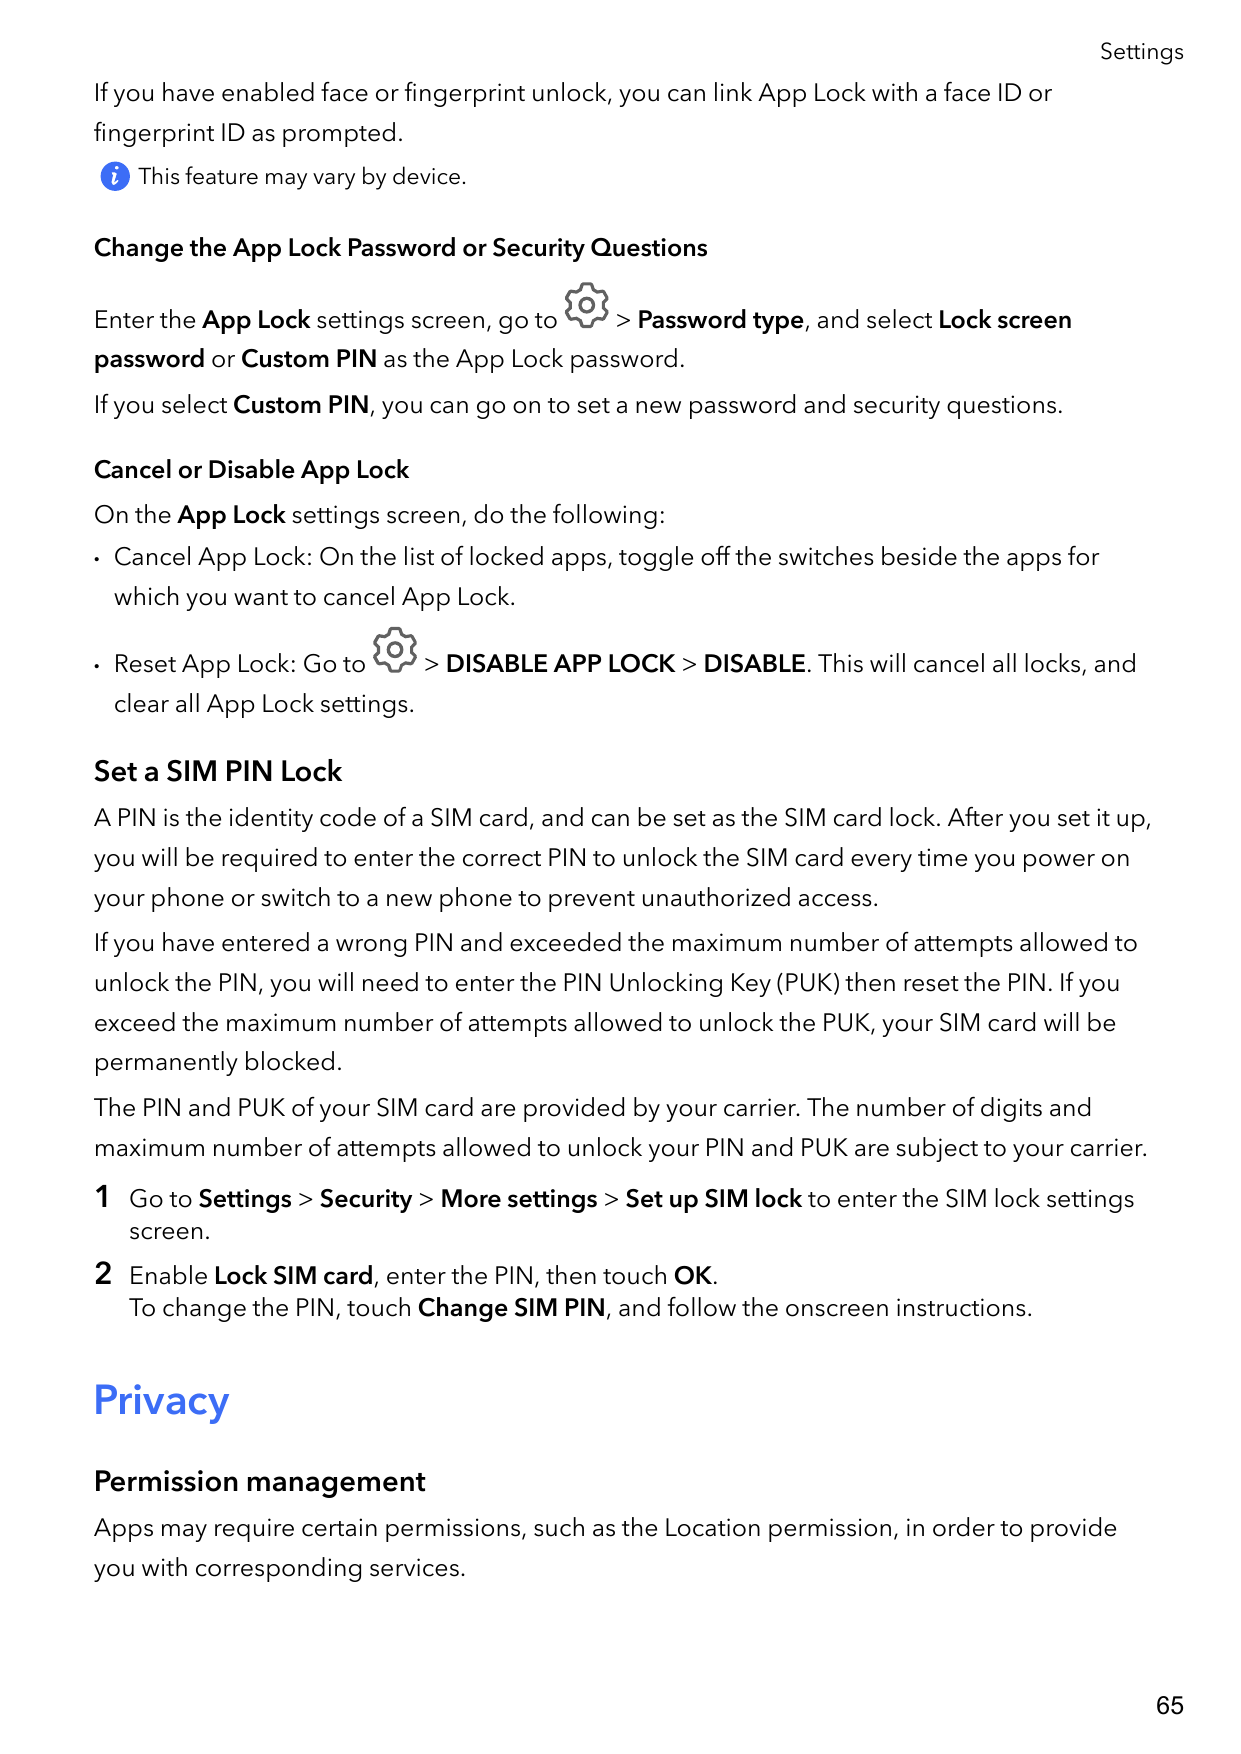 SettingsIf you have enabled face or fingerprint unlock, you can link App Lock with a face ID orfingerprint ID as prompted.This f